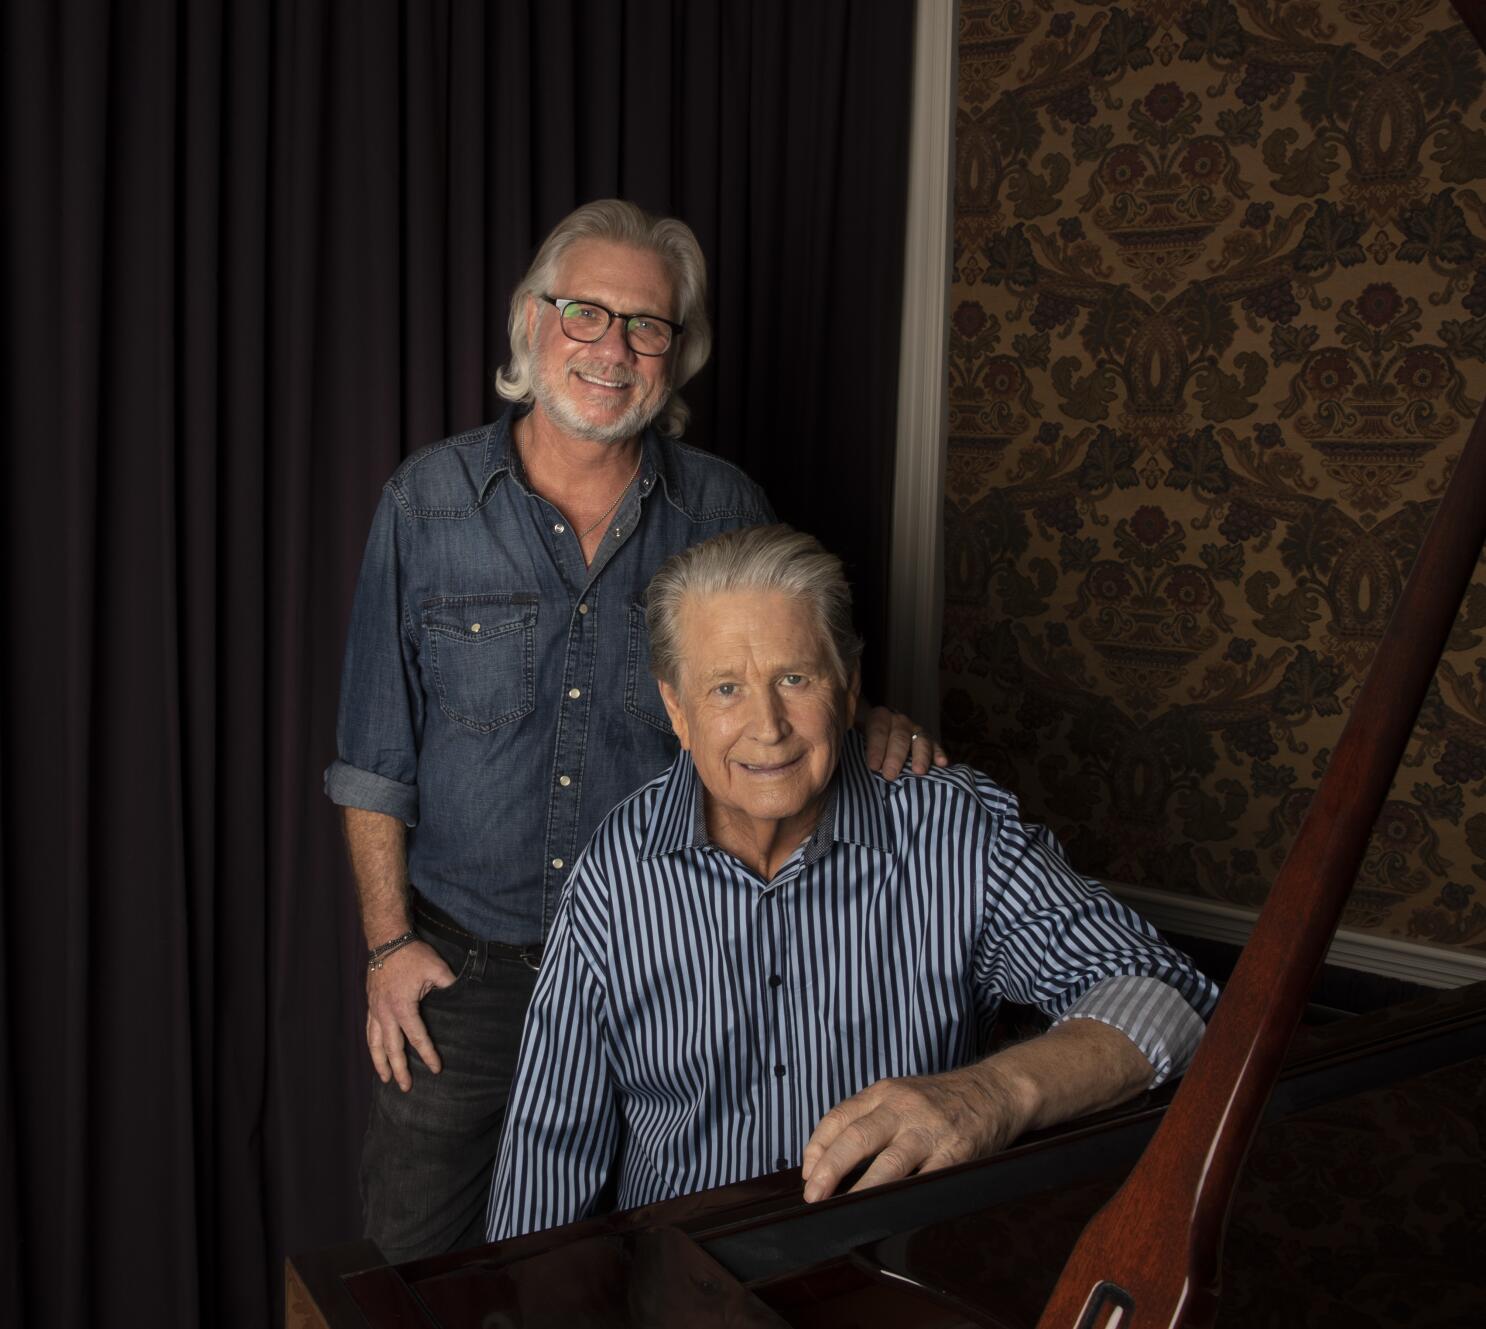 Brian Wilson names the greatest bass player in the world